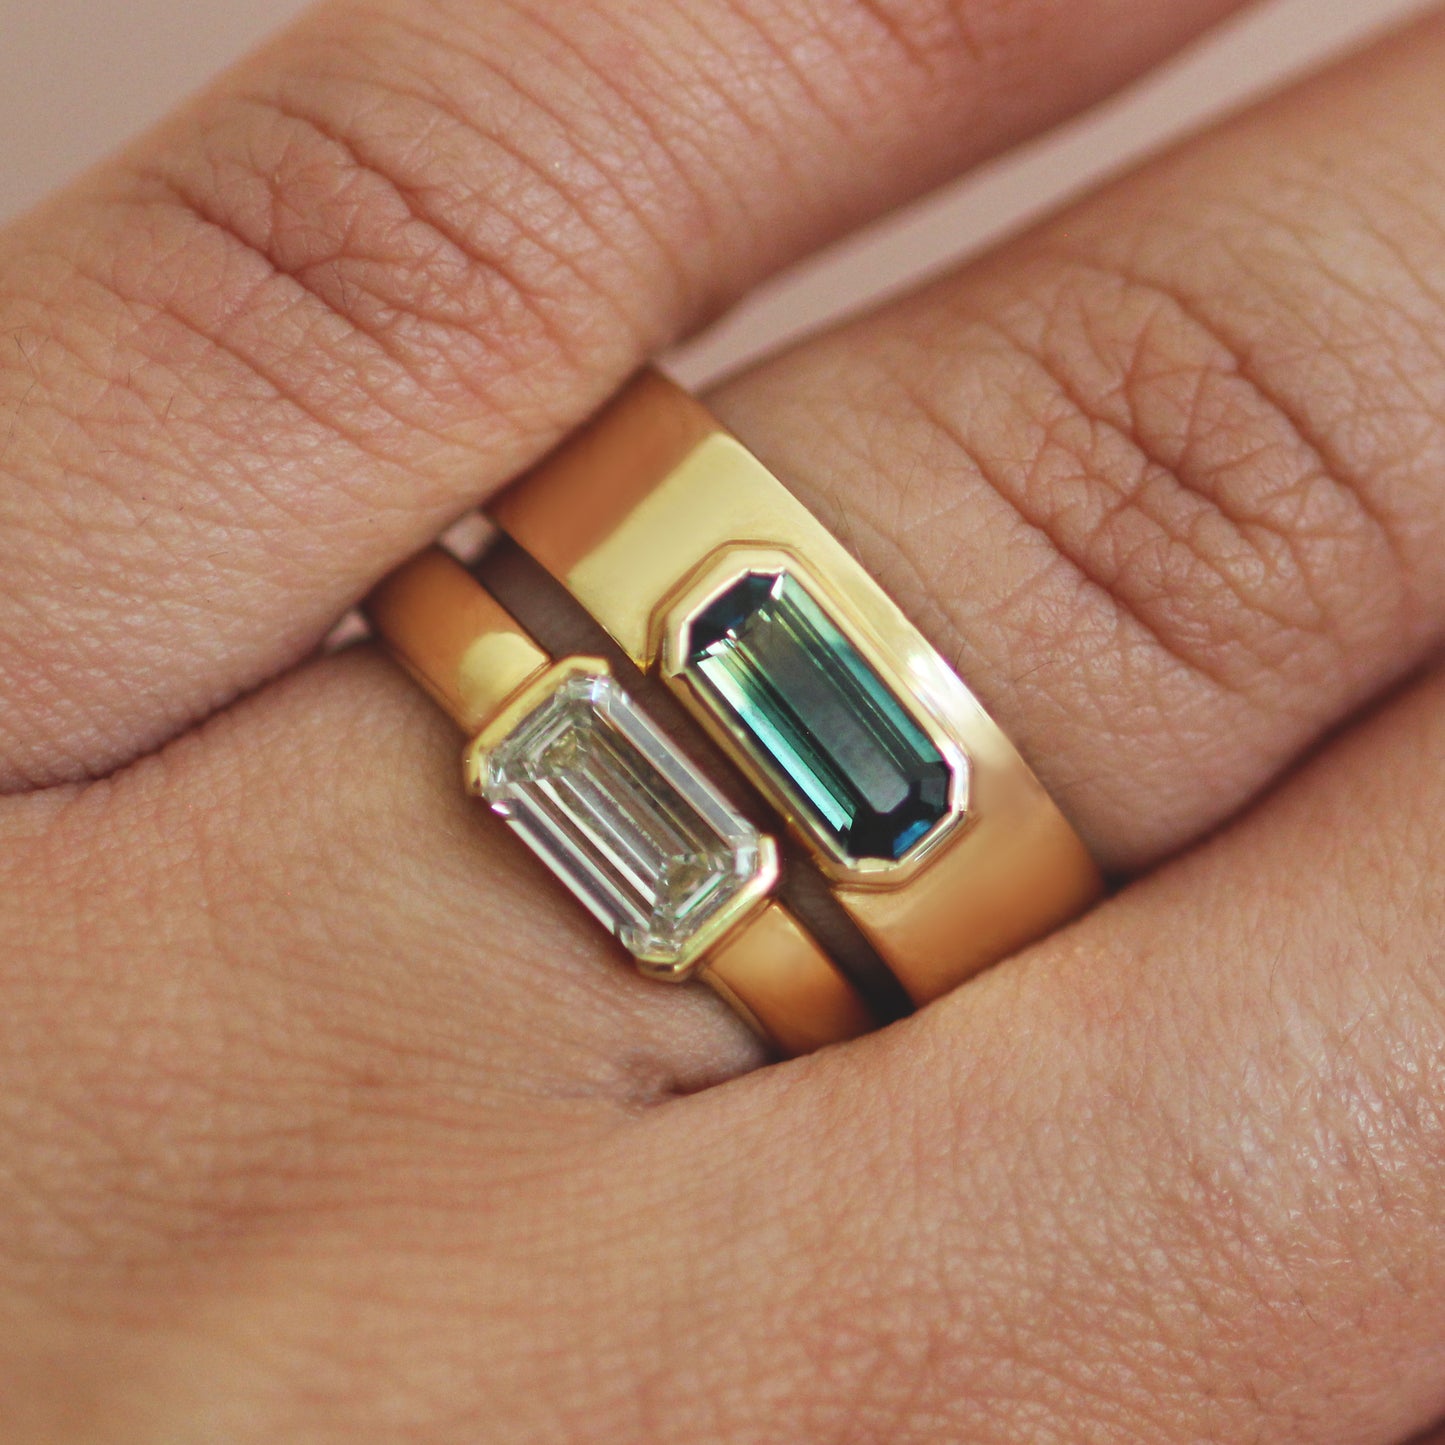 Model wearing Horizon Band / Bicolor Blue Yellow Emerald Cut Sapphire stacked on an engagement ring